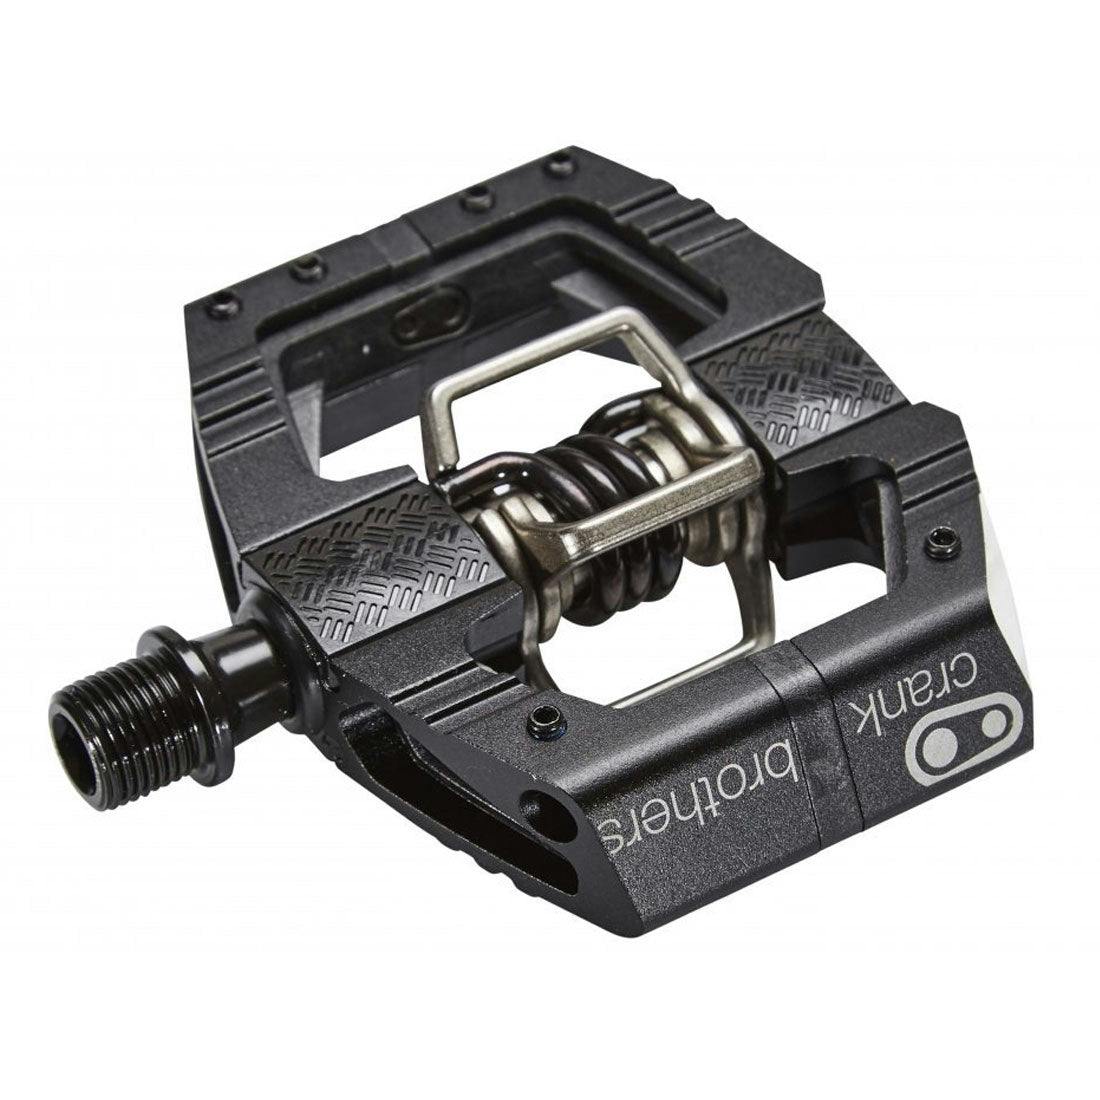 Crank Brothers Mallet Enduro Bike Pedals · Black · One Size